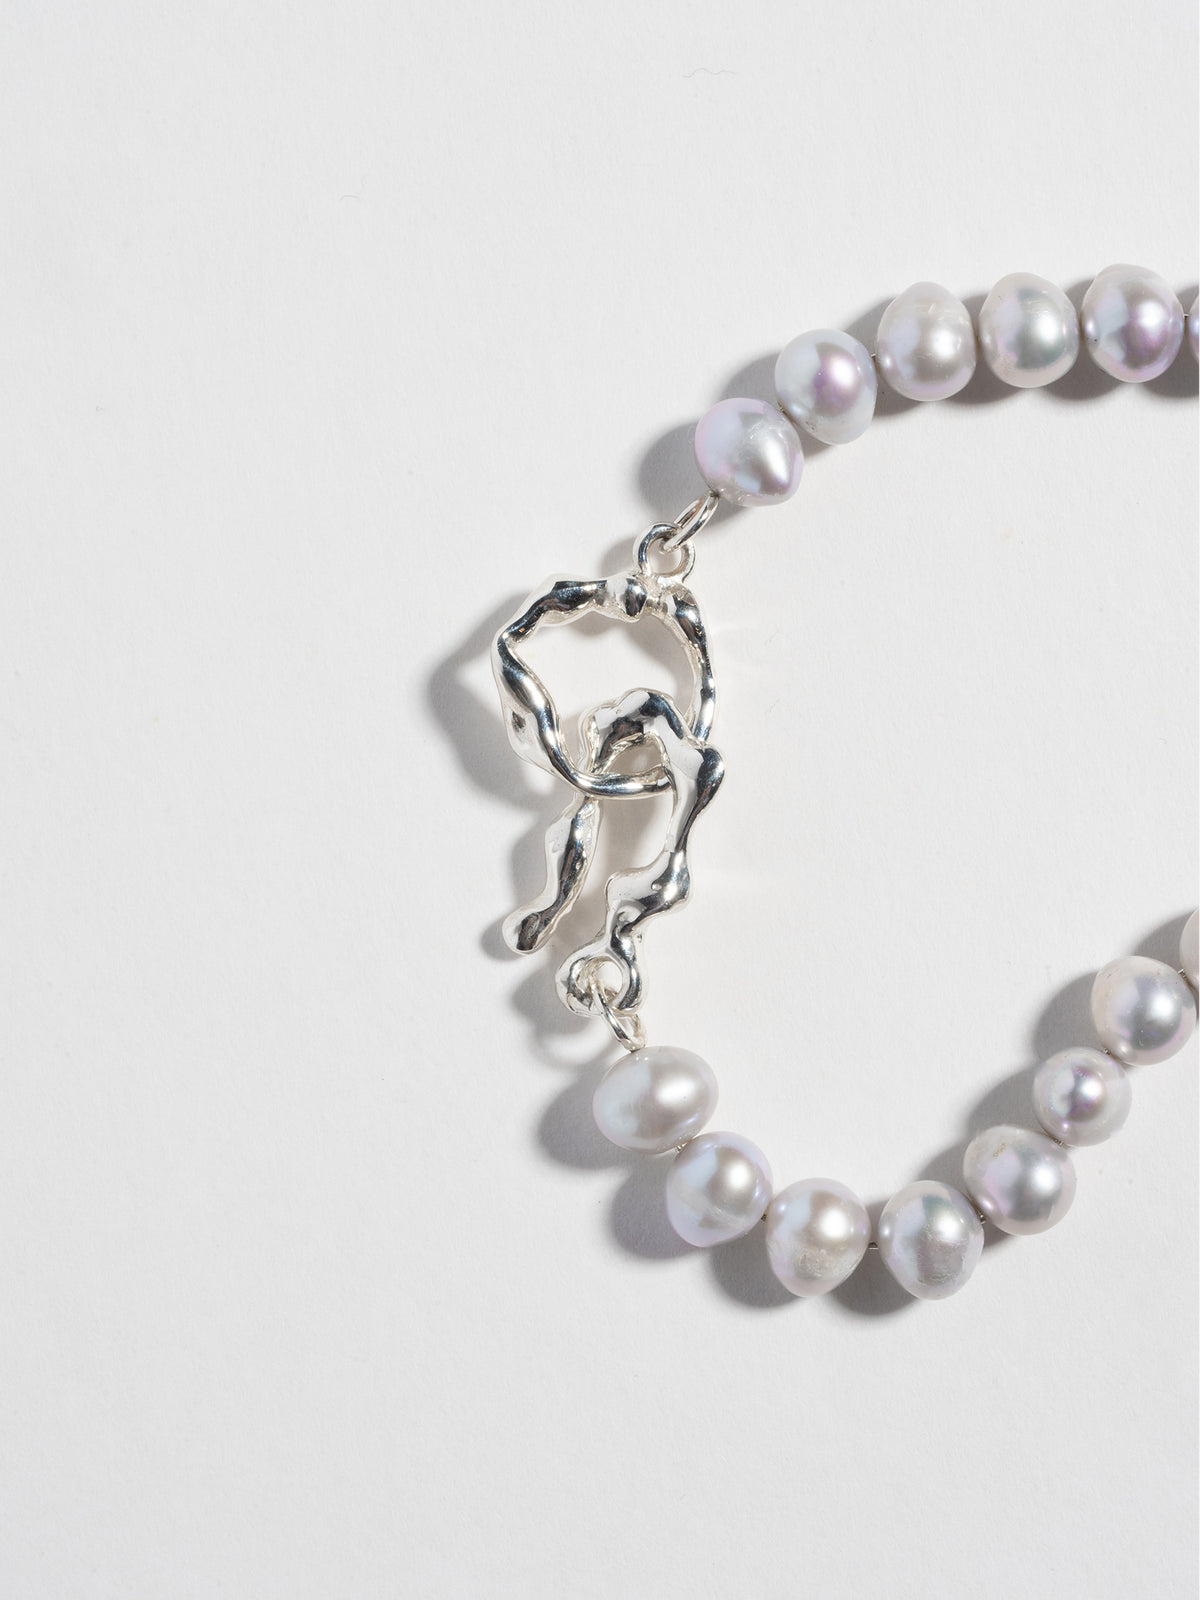 Close up image of hand-carved hook eye closure on FARIS PATTA Bracelet in sterling silver.